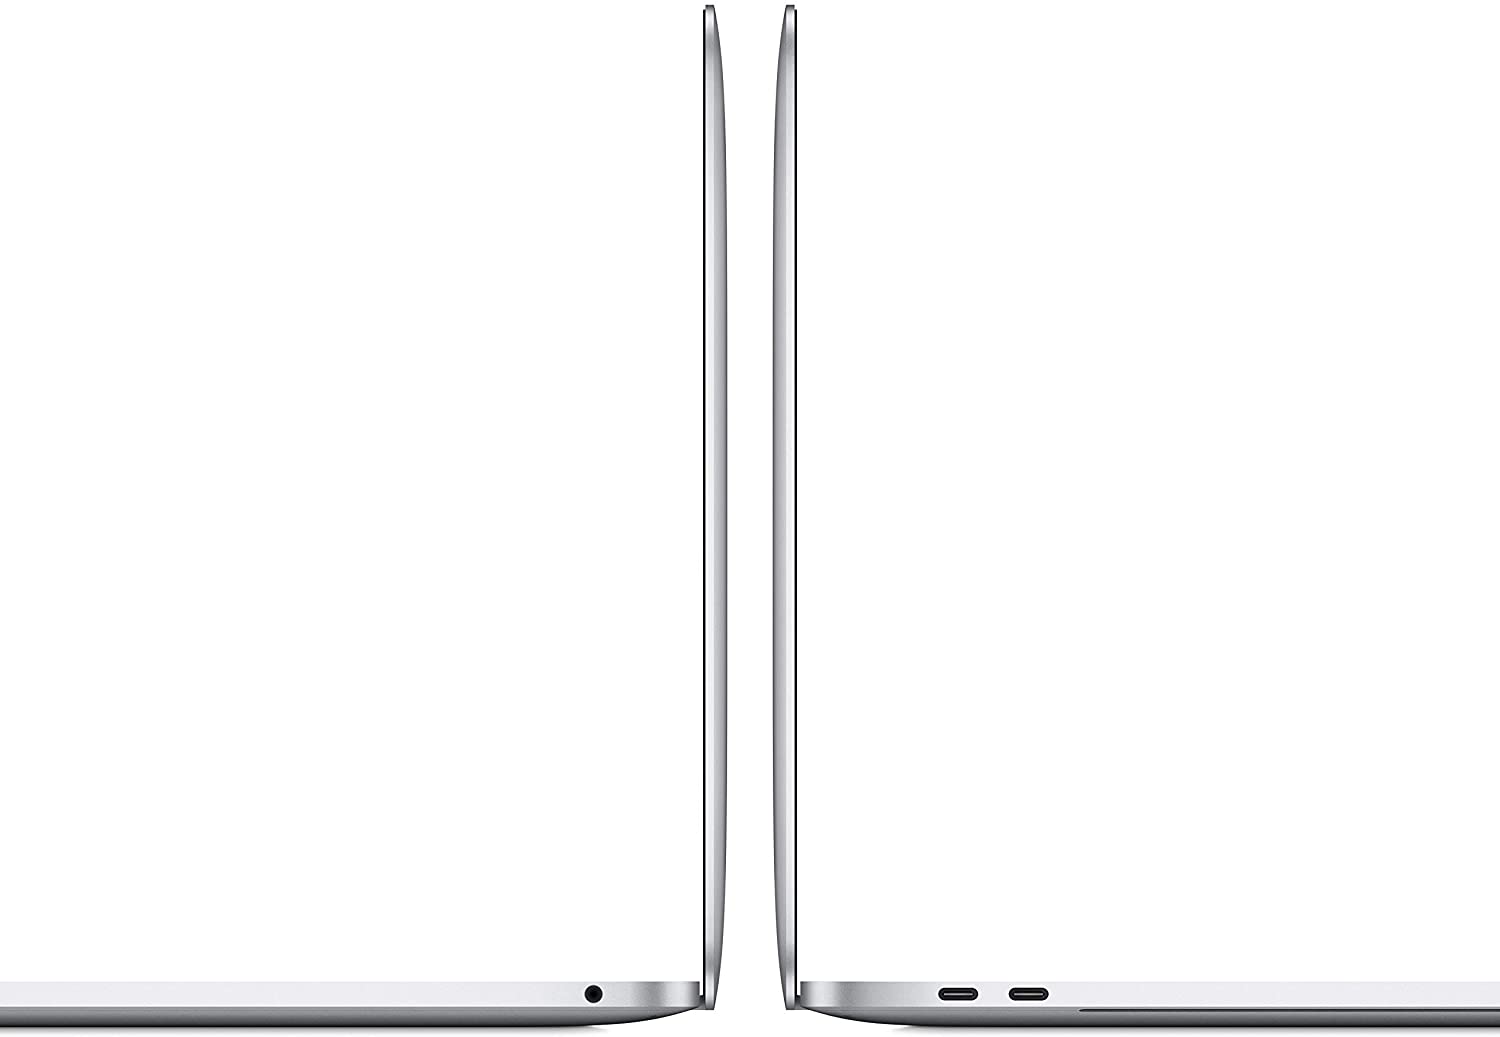 Restored Apple MacBook Pro MUHN2LL/A with 13.3" Intel Core i5 1.4GHz 8GB RAM Silver (Refurbished) - image 5 of 6